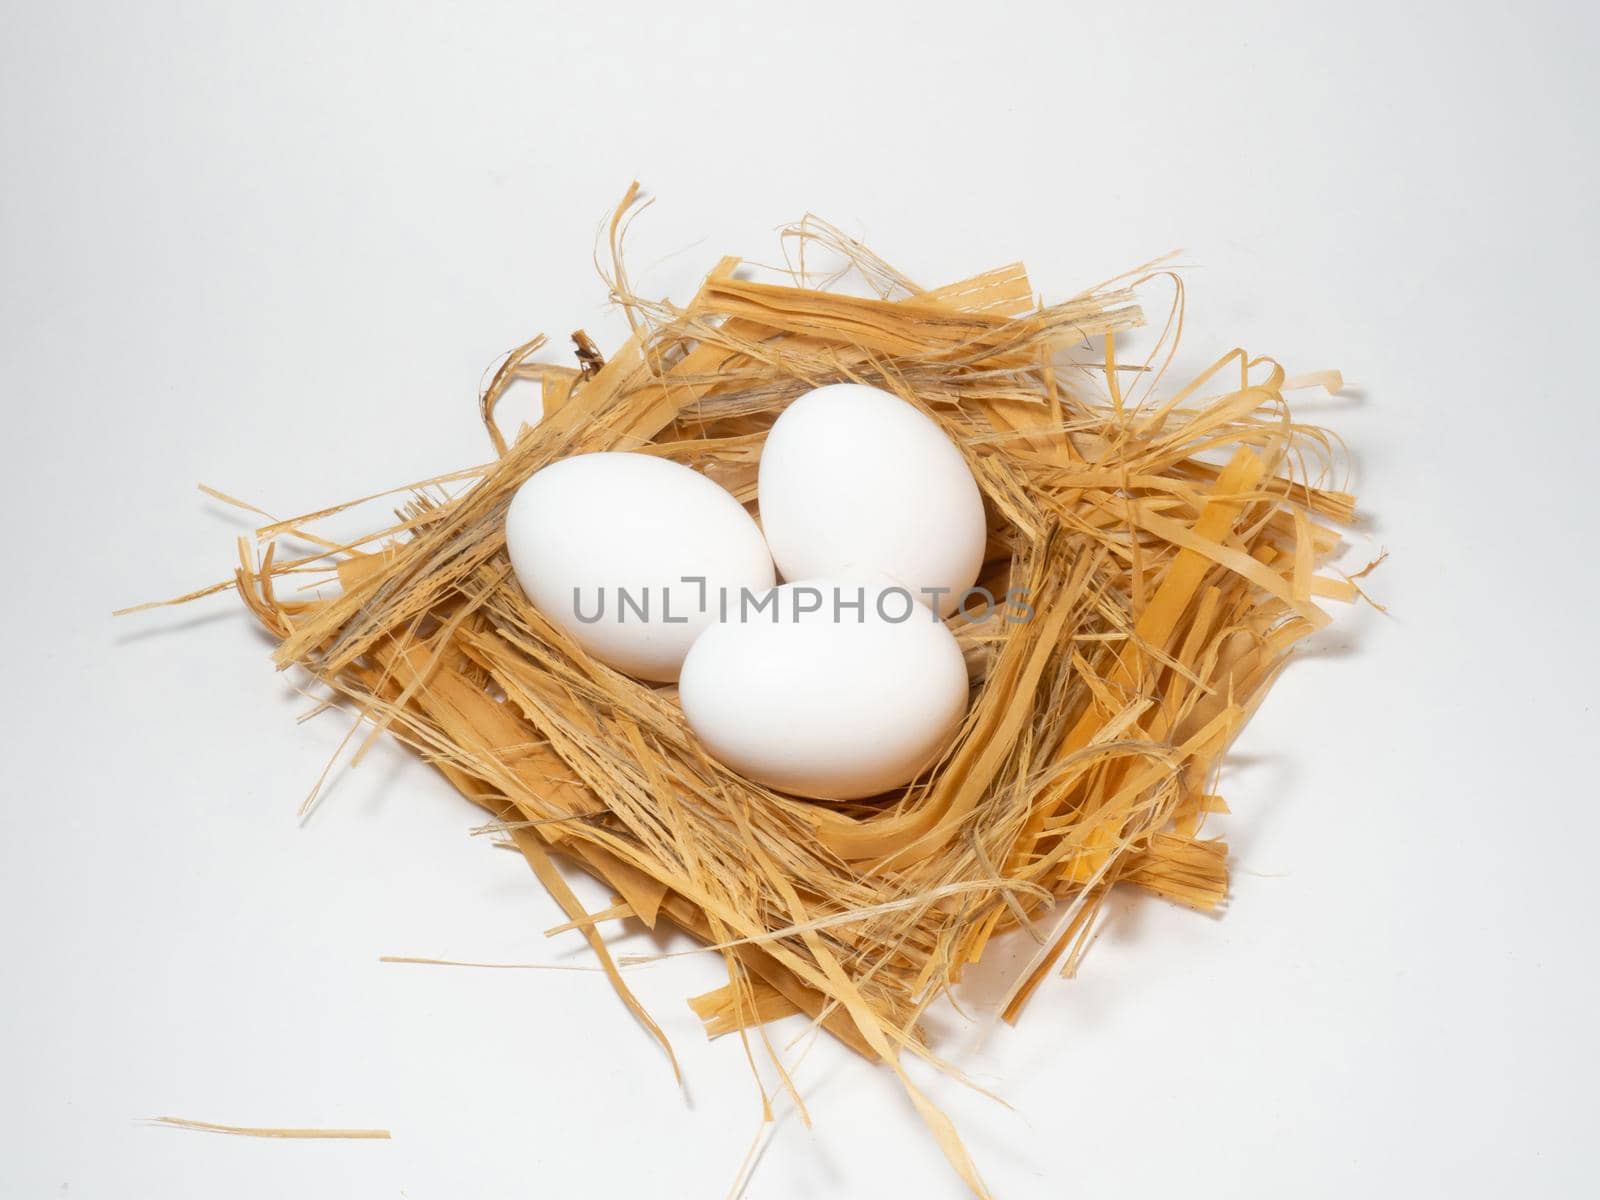 A chicken egg lies in the straw. Three eggs
